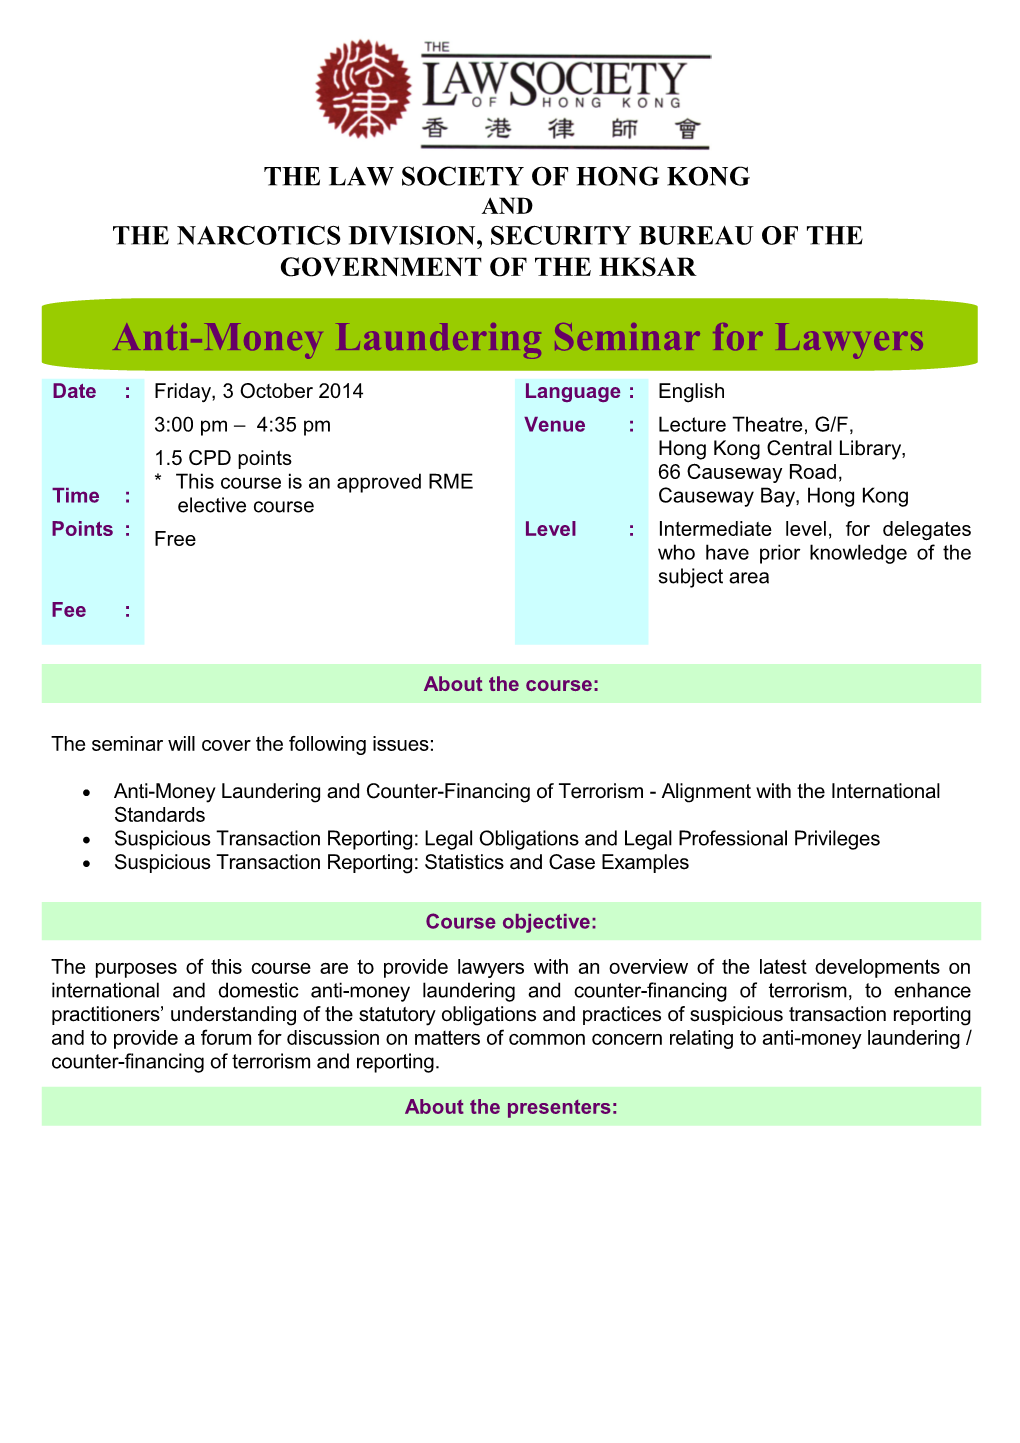 Re: Anti-Money Laundering Seminar for Lawyers, Friday, 3 October 2014 (100314P)